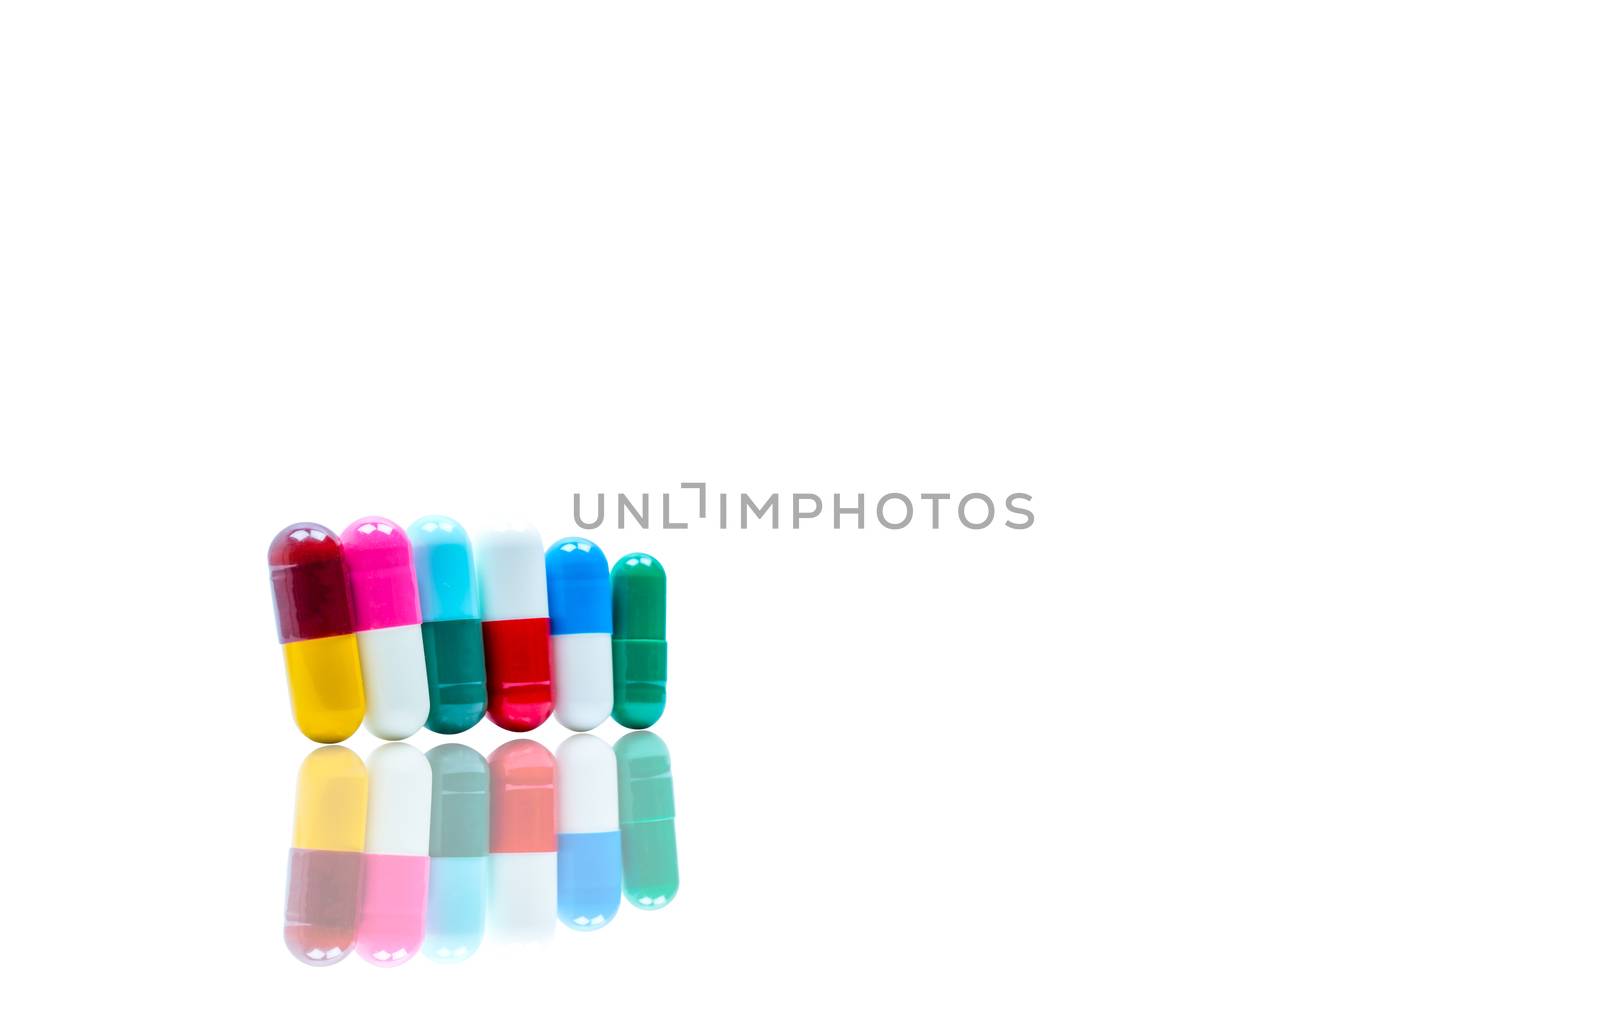 Antibiotic capsules pills in a row on white background with shadows and copy space. Drug resistance concept. Antibiotics drug use with reasonable and global healthcare concept. Pharmaceutical industry. Pharmacy background. Health budgets and policy.